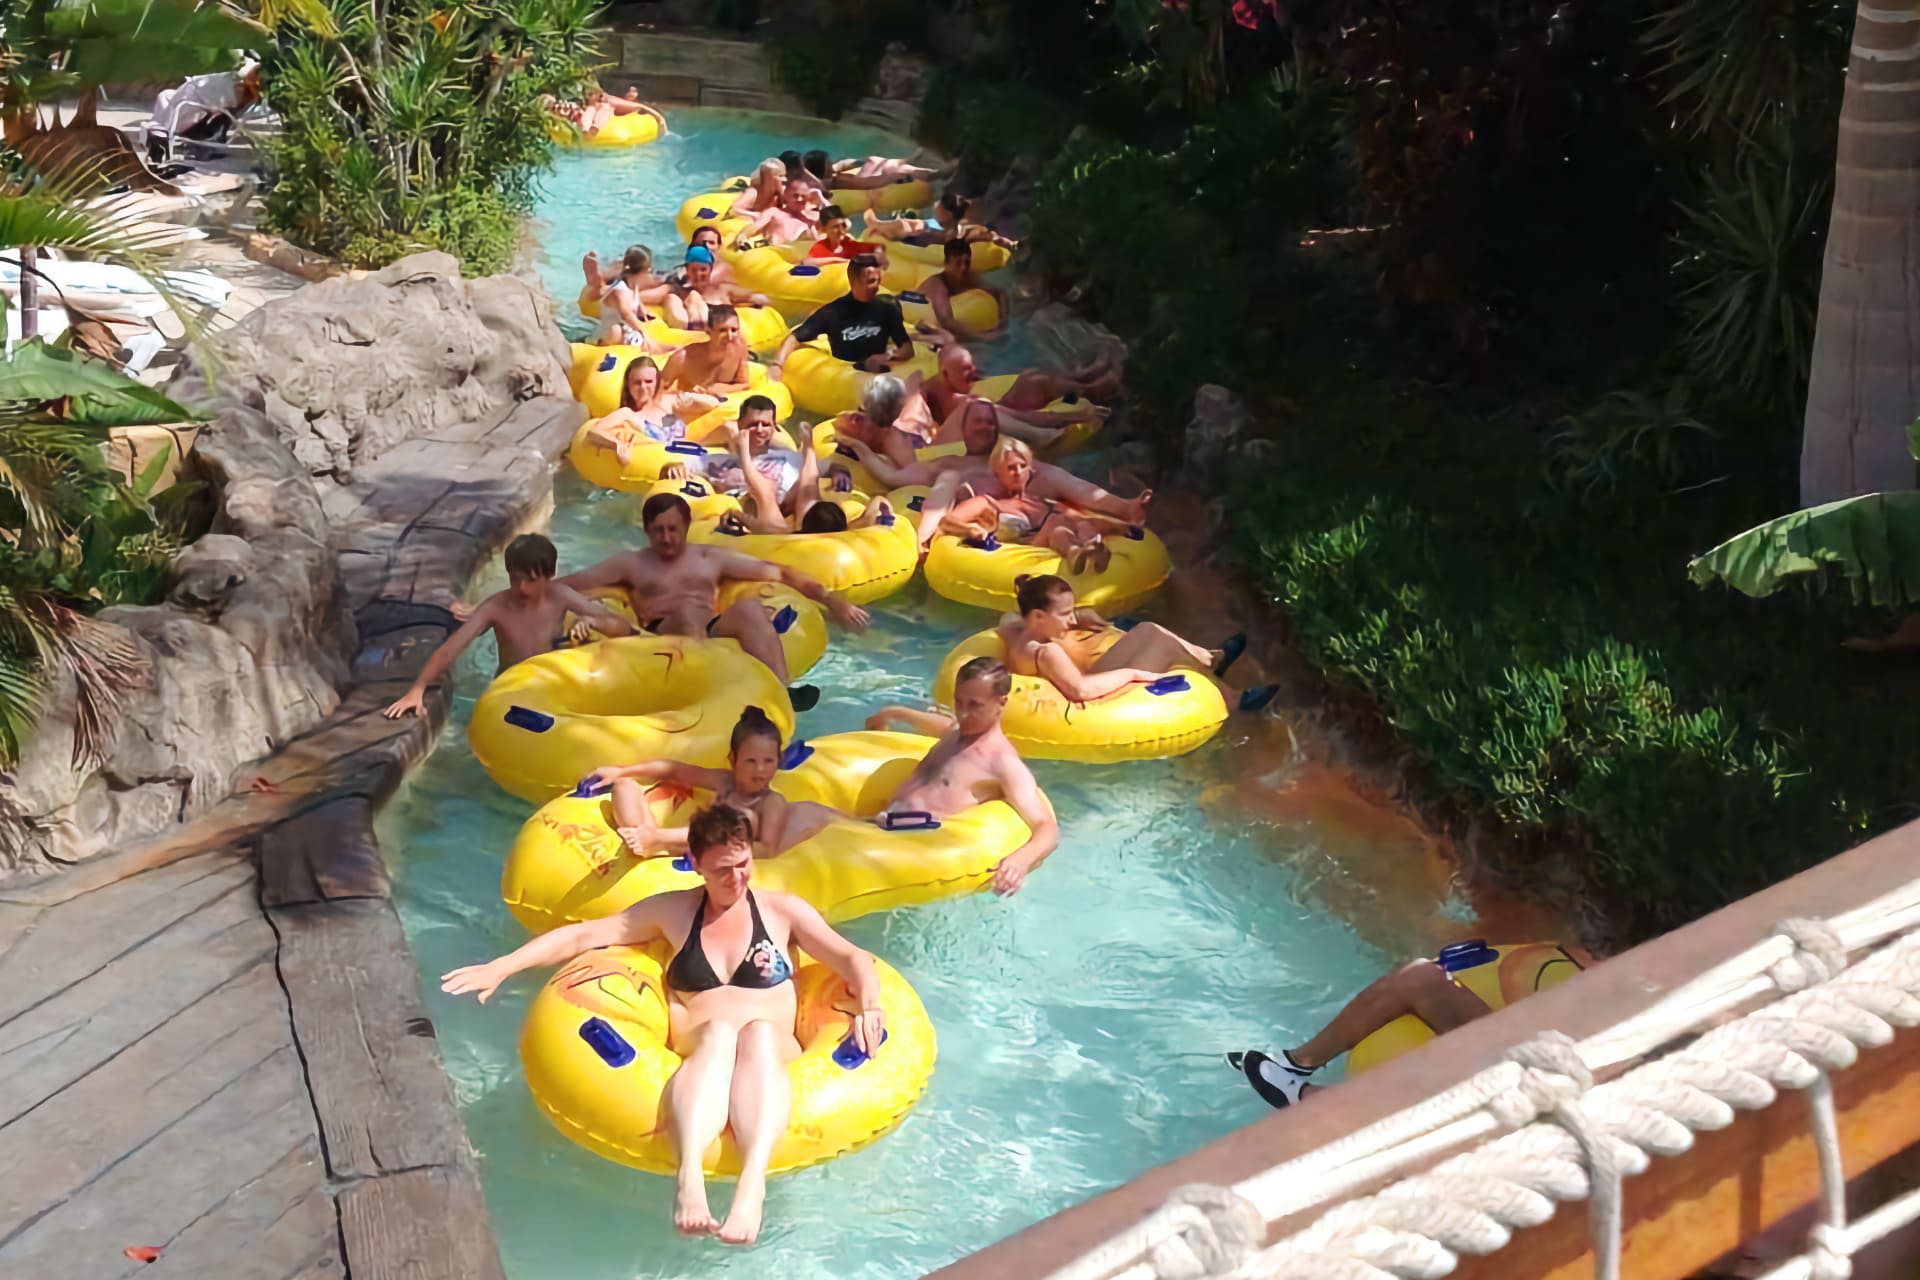 A jam on the lazy river in Sima Park.